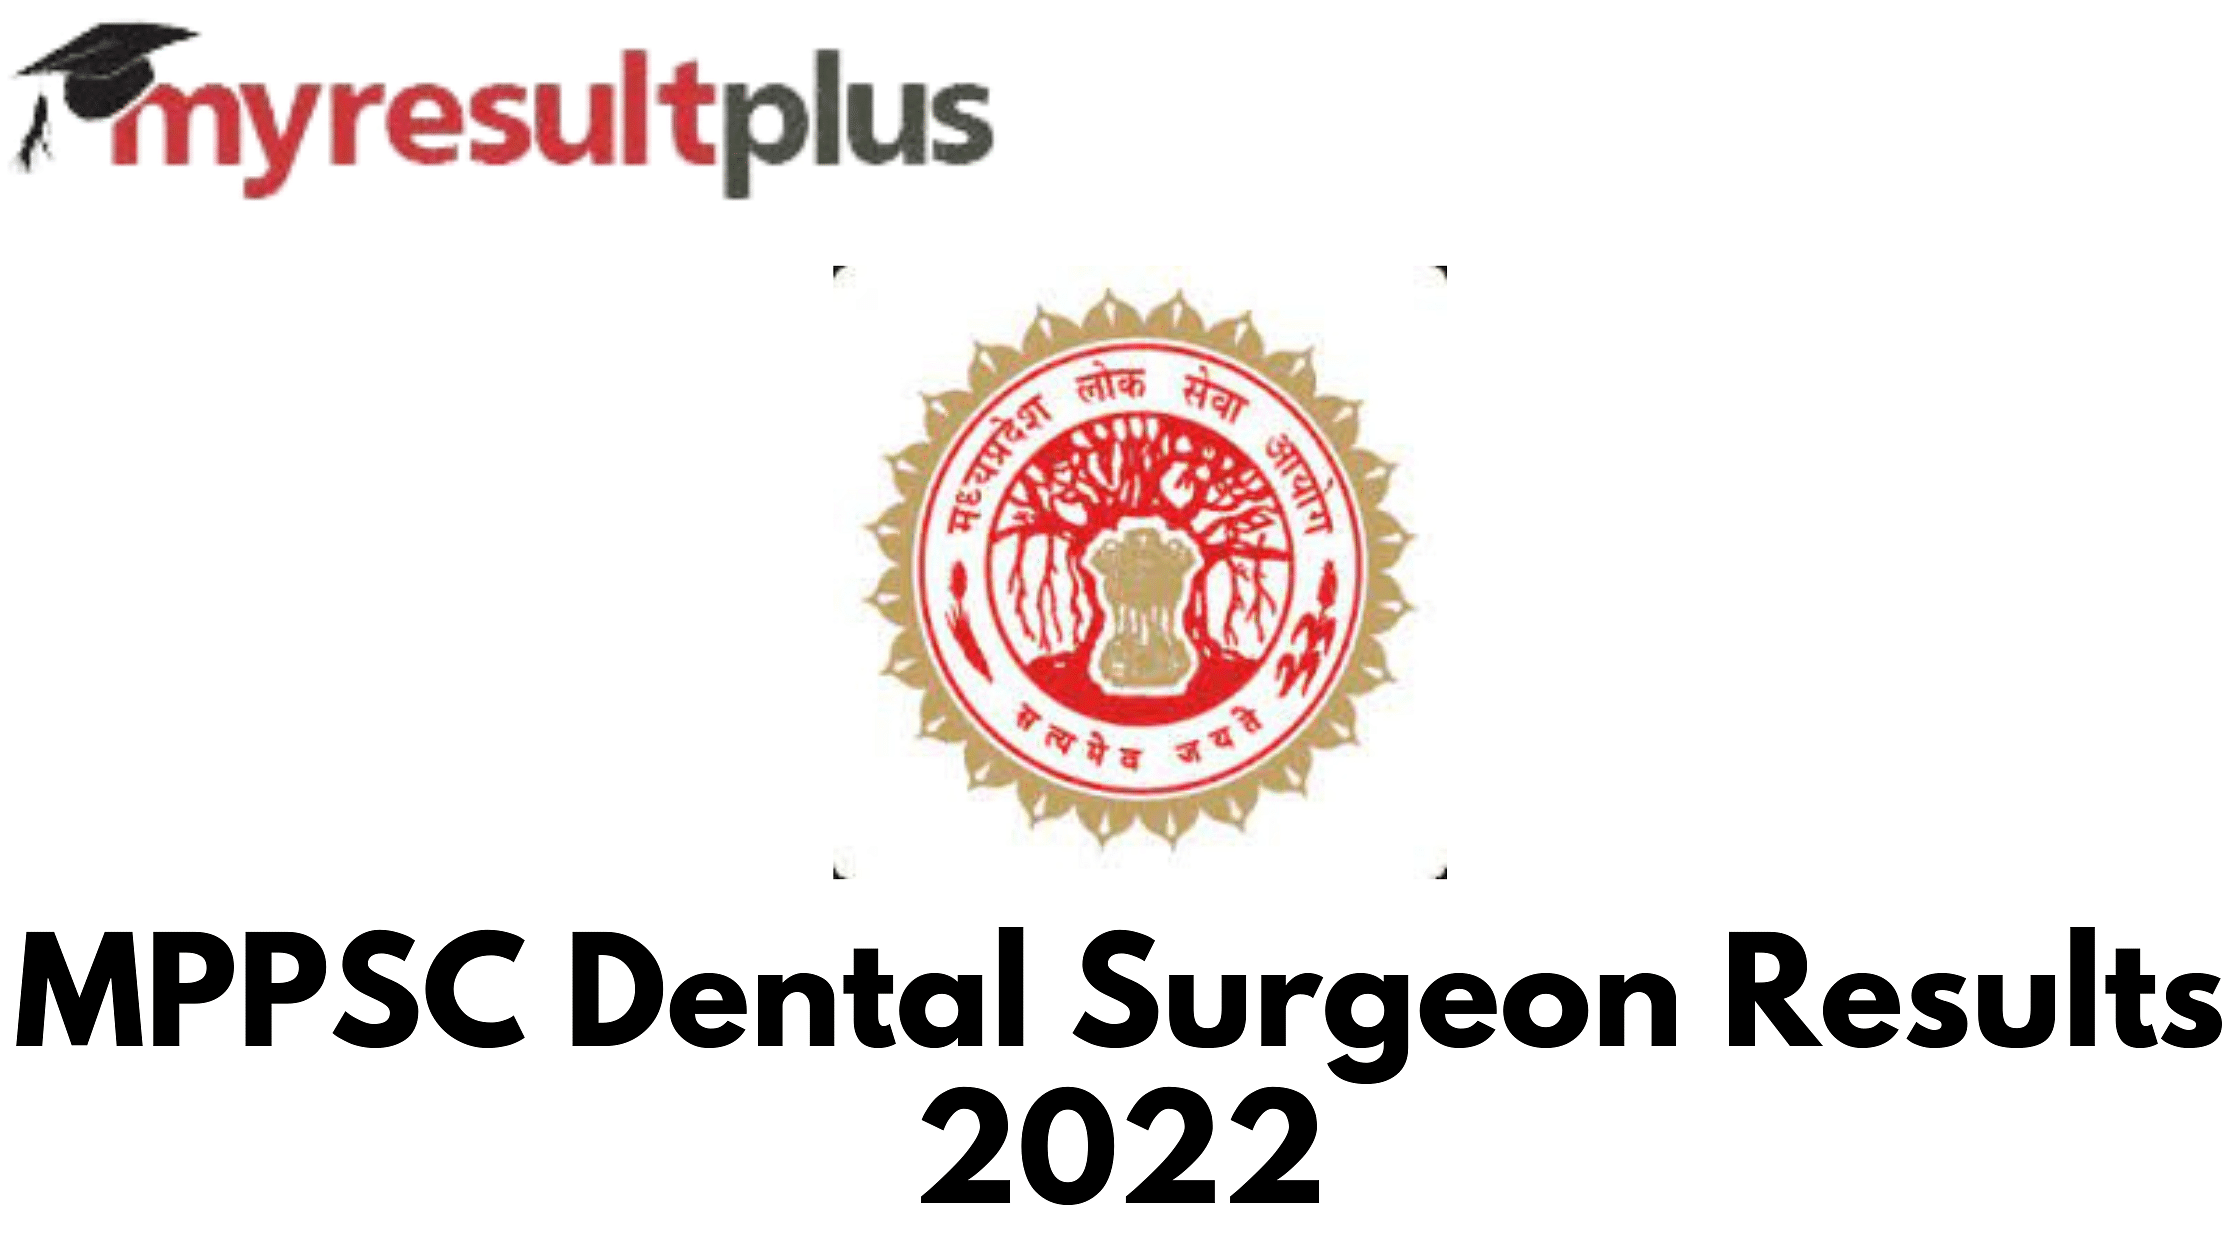 MPPSC Dental Surgeon Results 2022 Out, Know How to Check Here